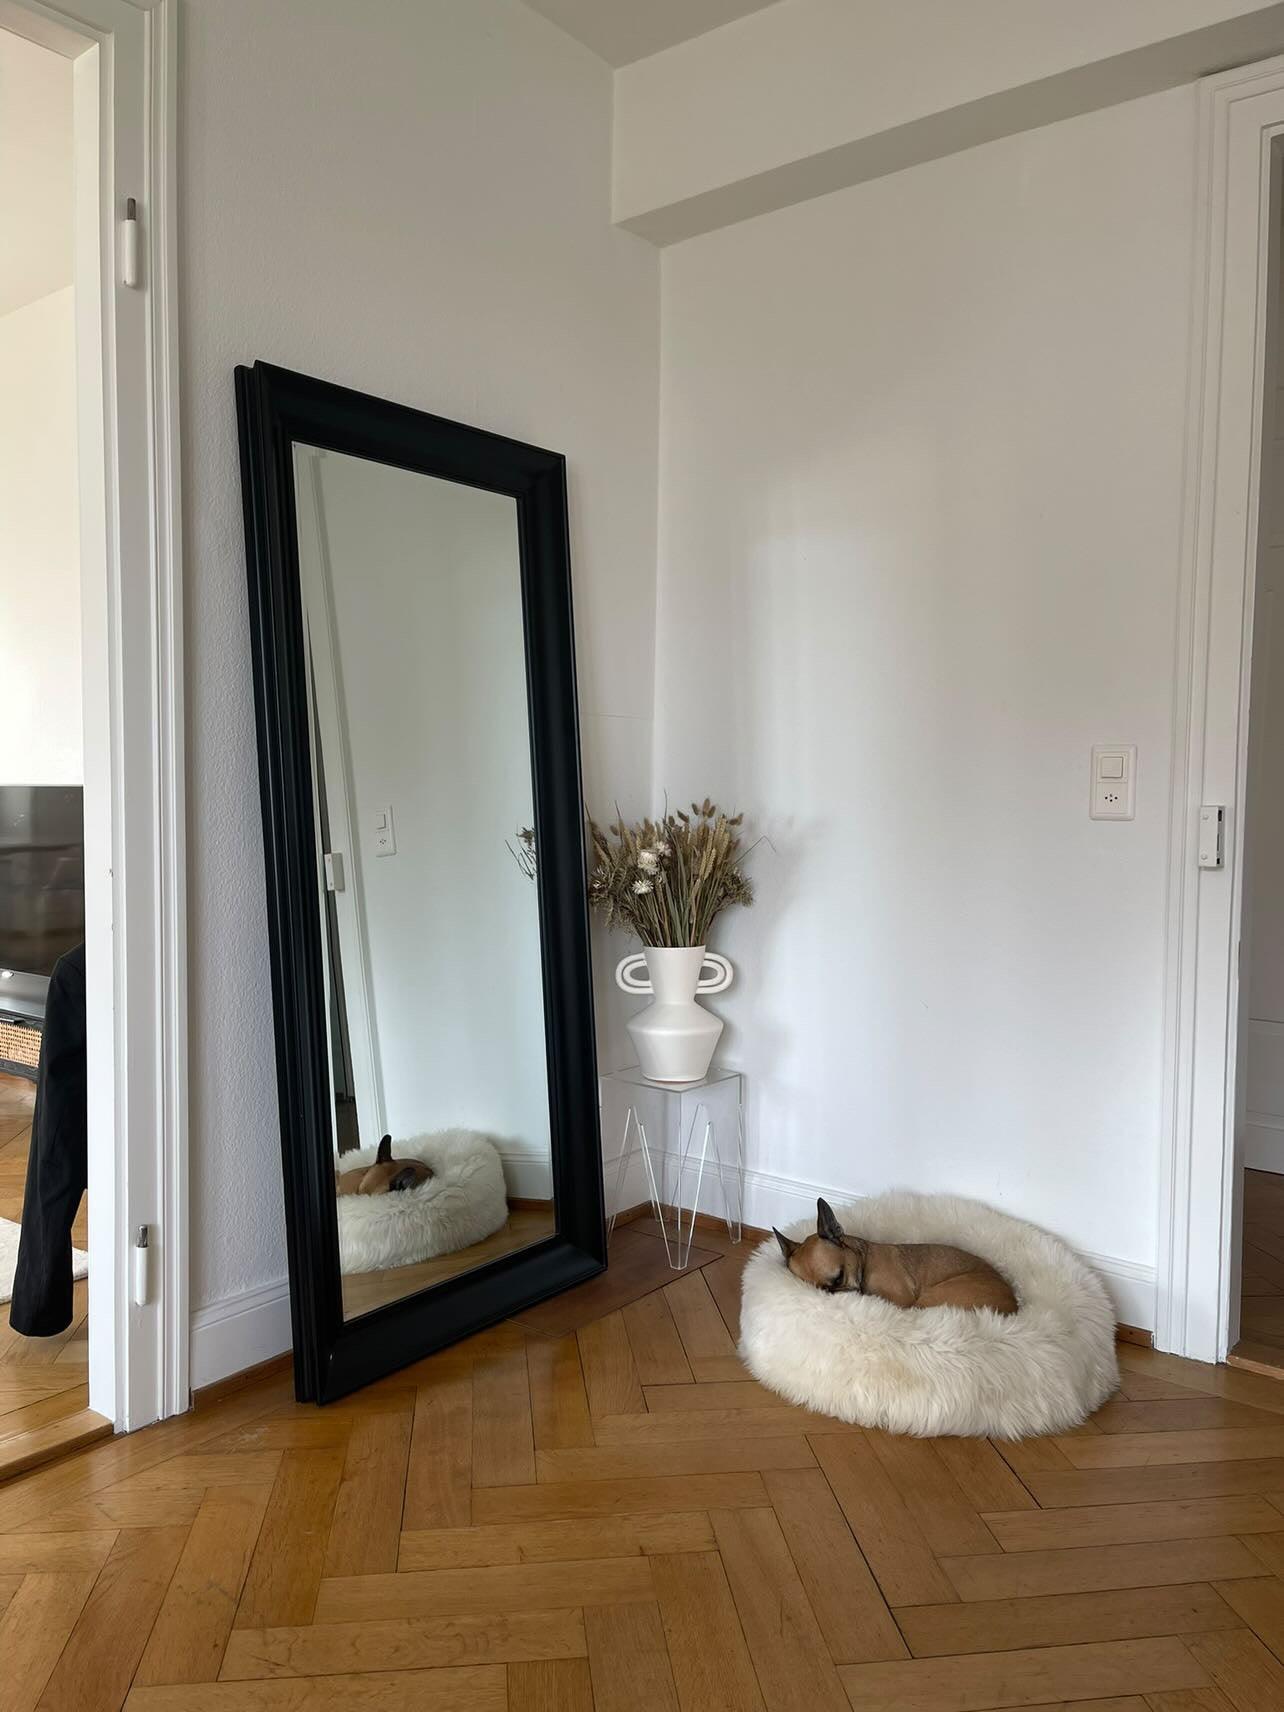 An Oval Natural Sheepskin Pet Bed from Mellow Pet Store in front of a mirror in a room.